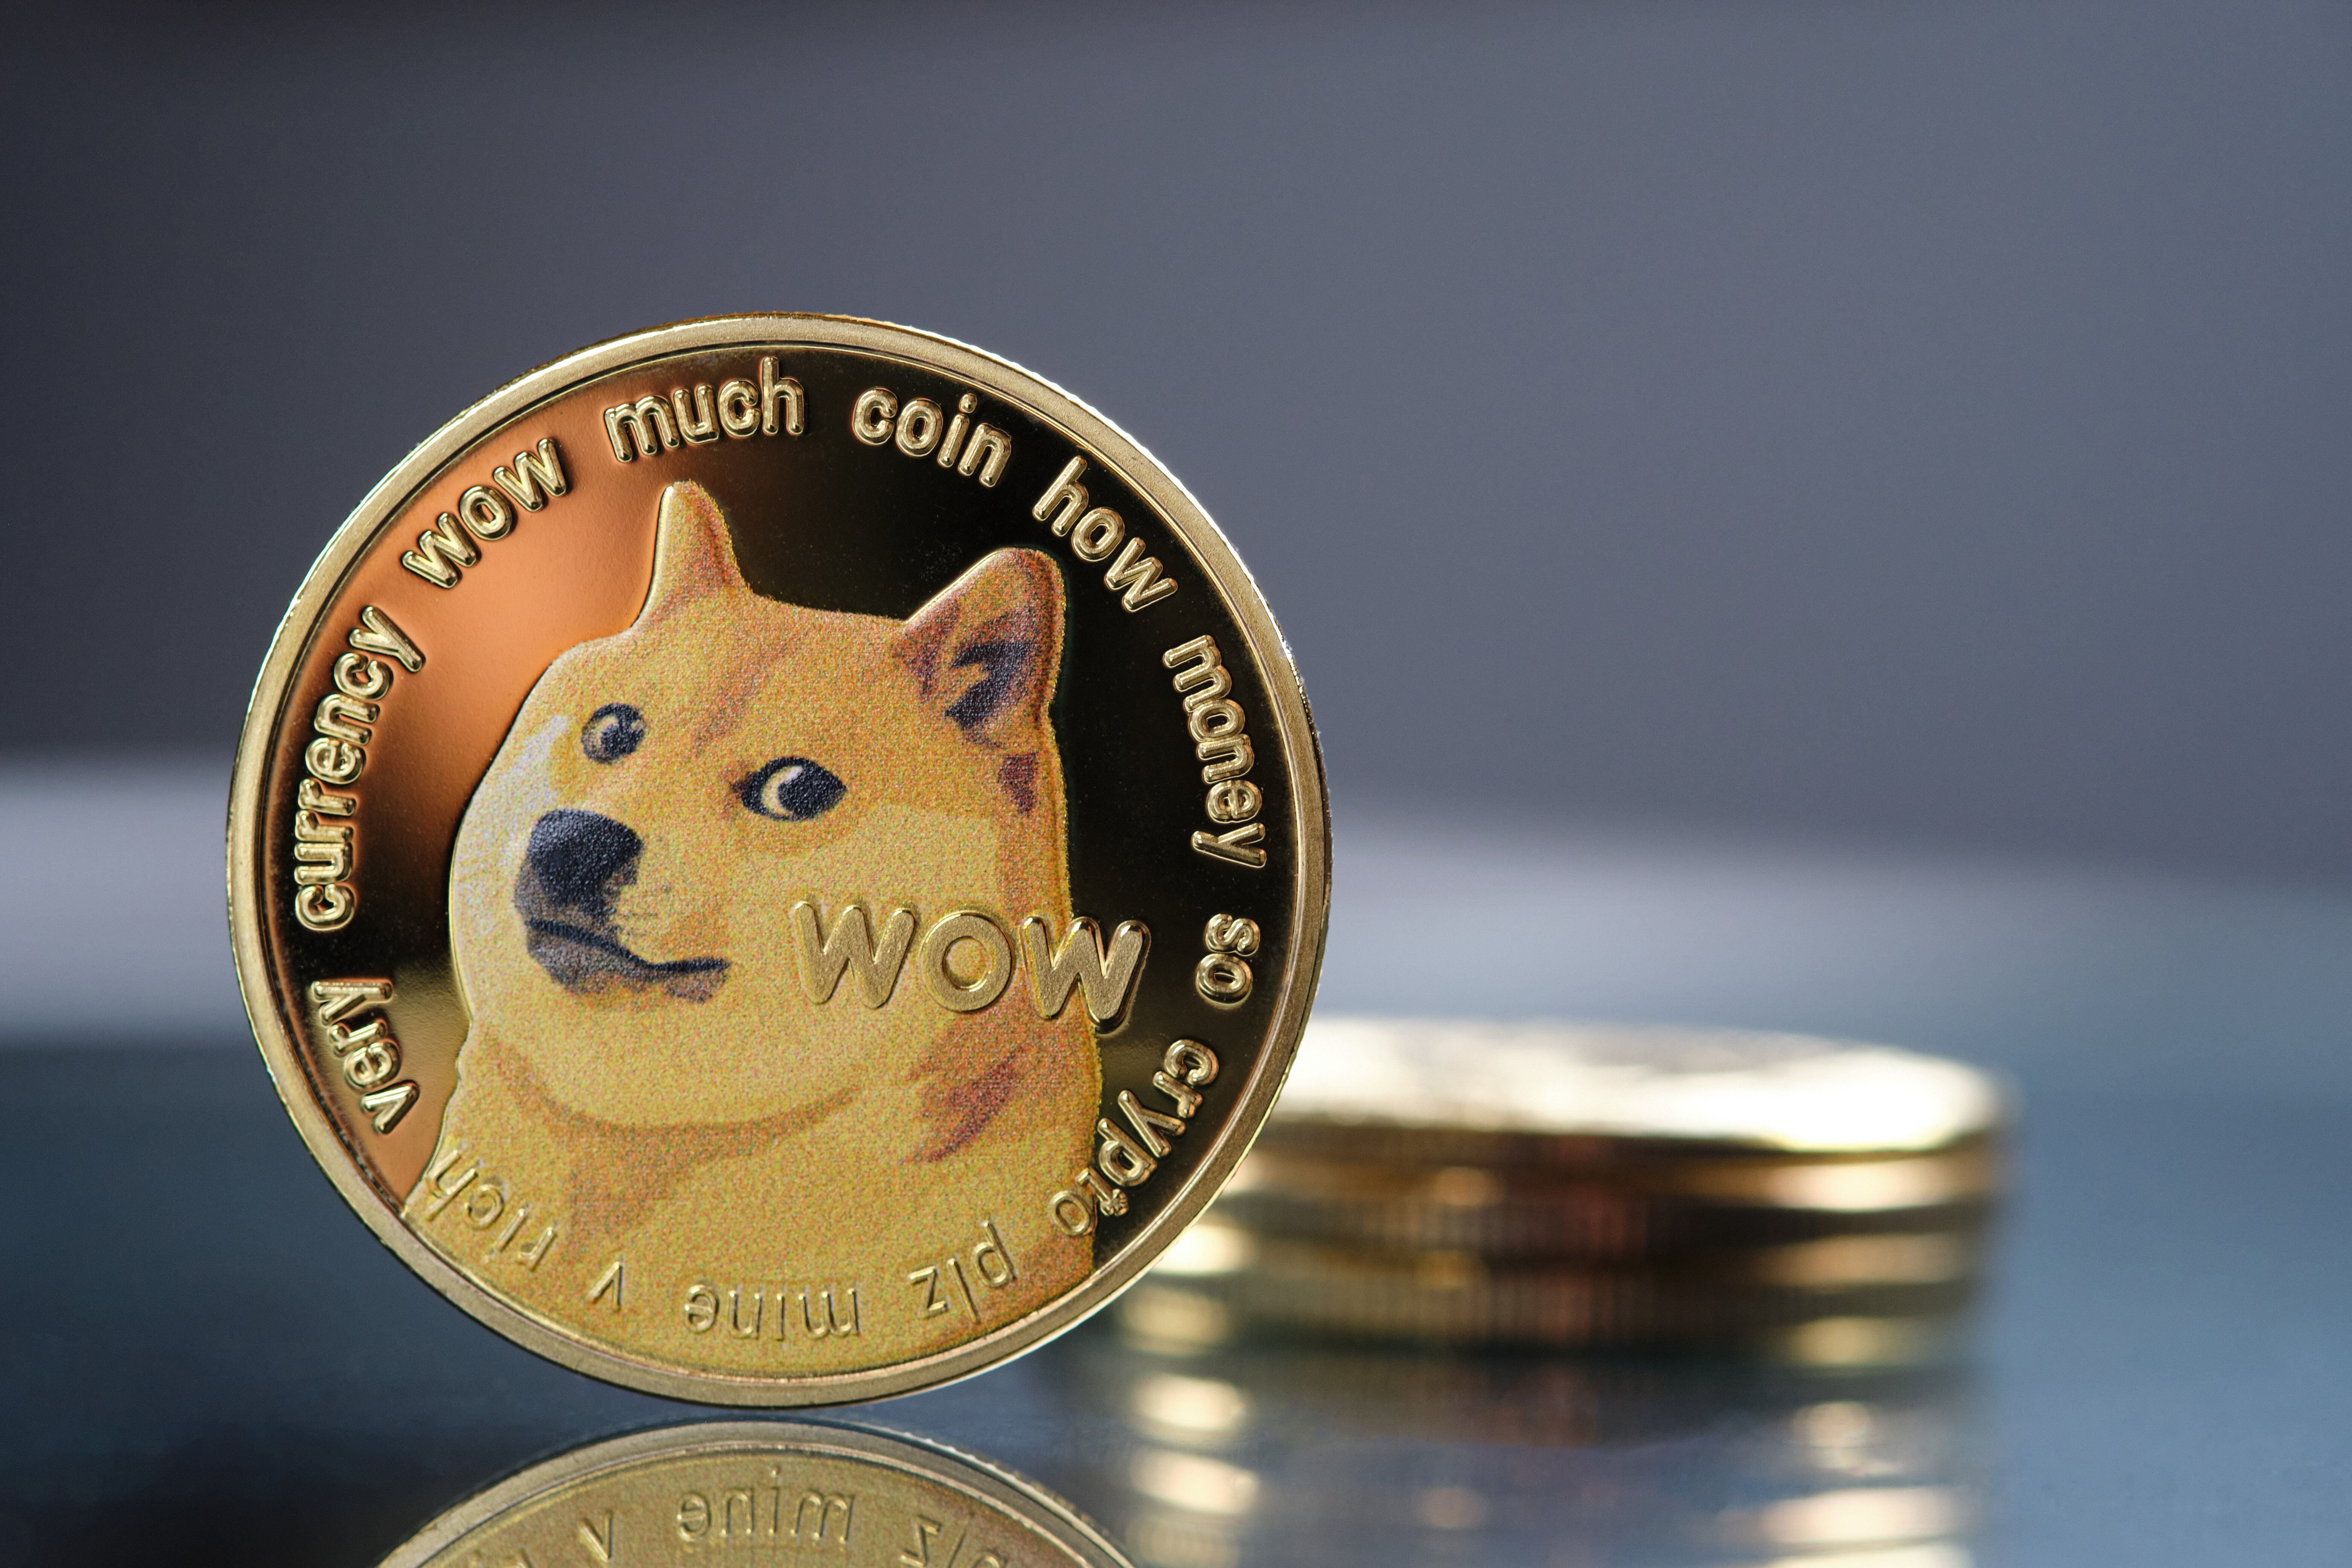 Dogecoin information, price for today and DOGE market cap